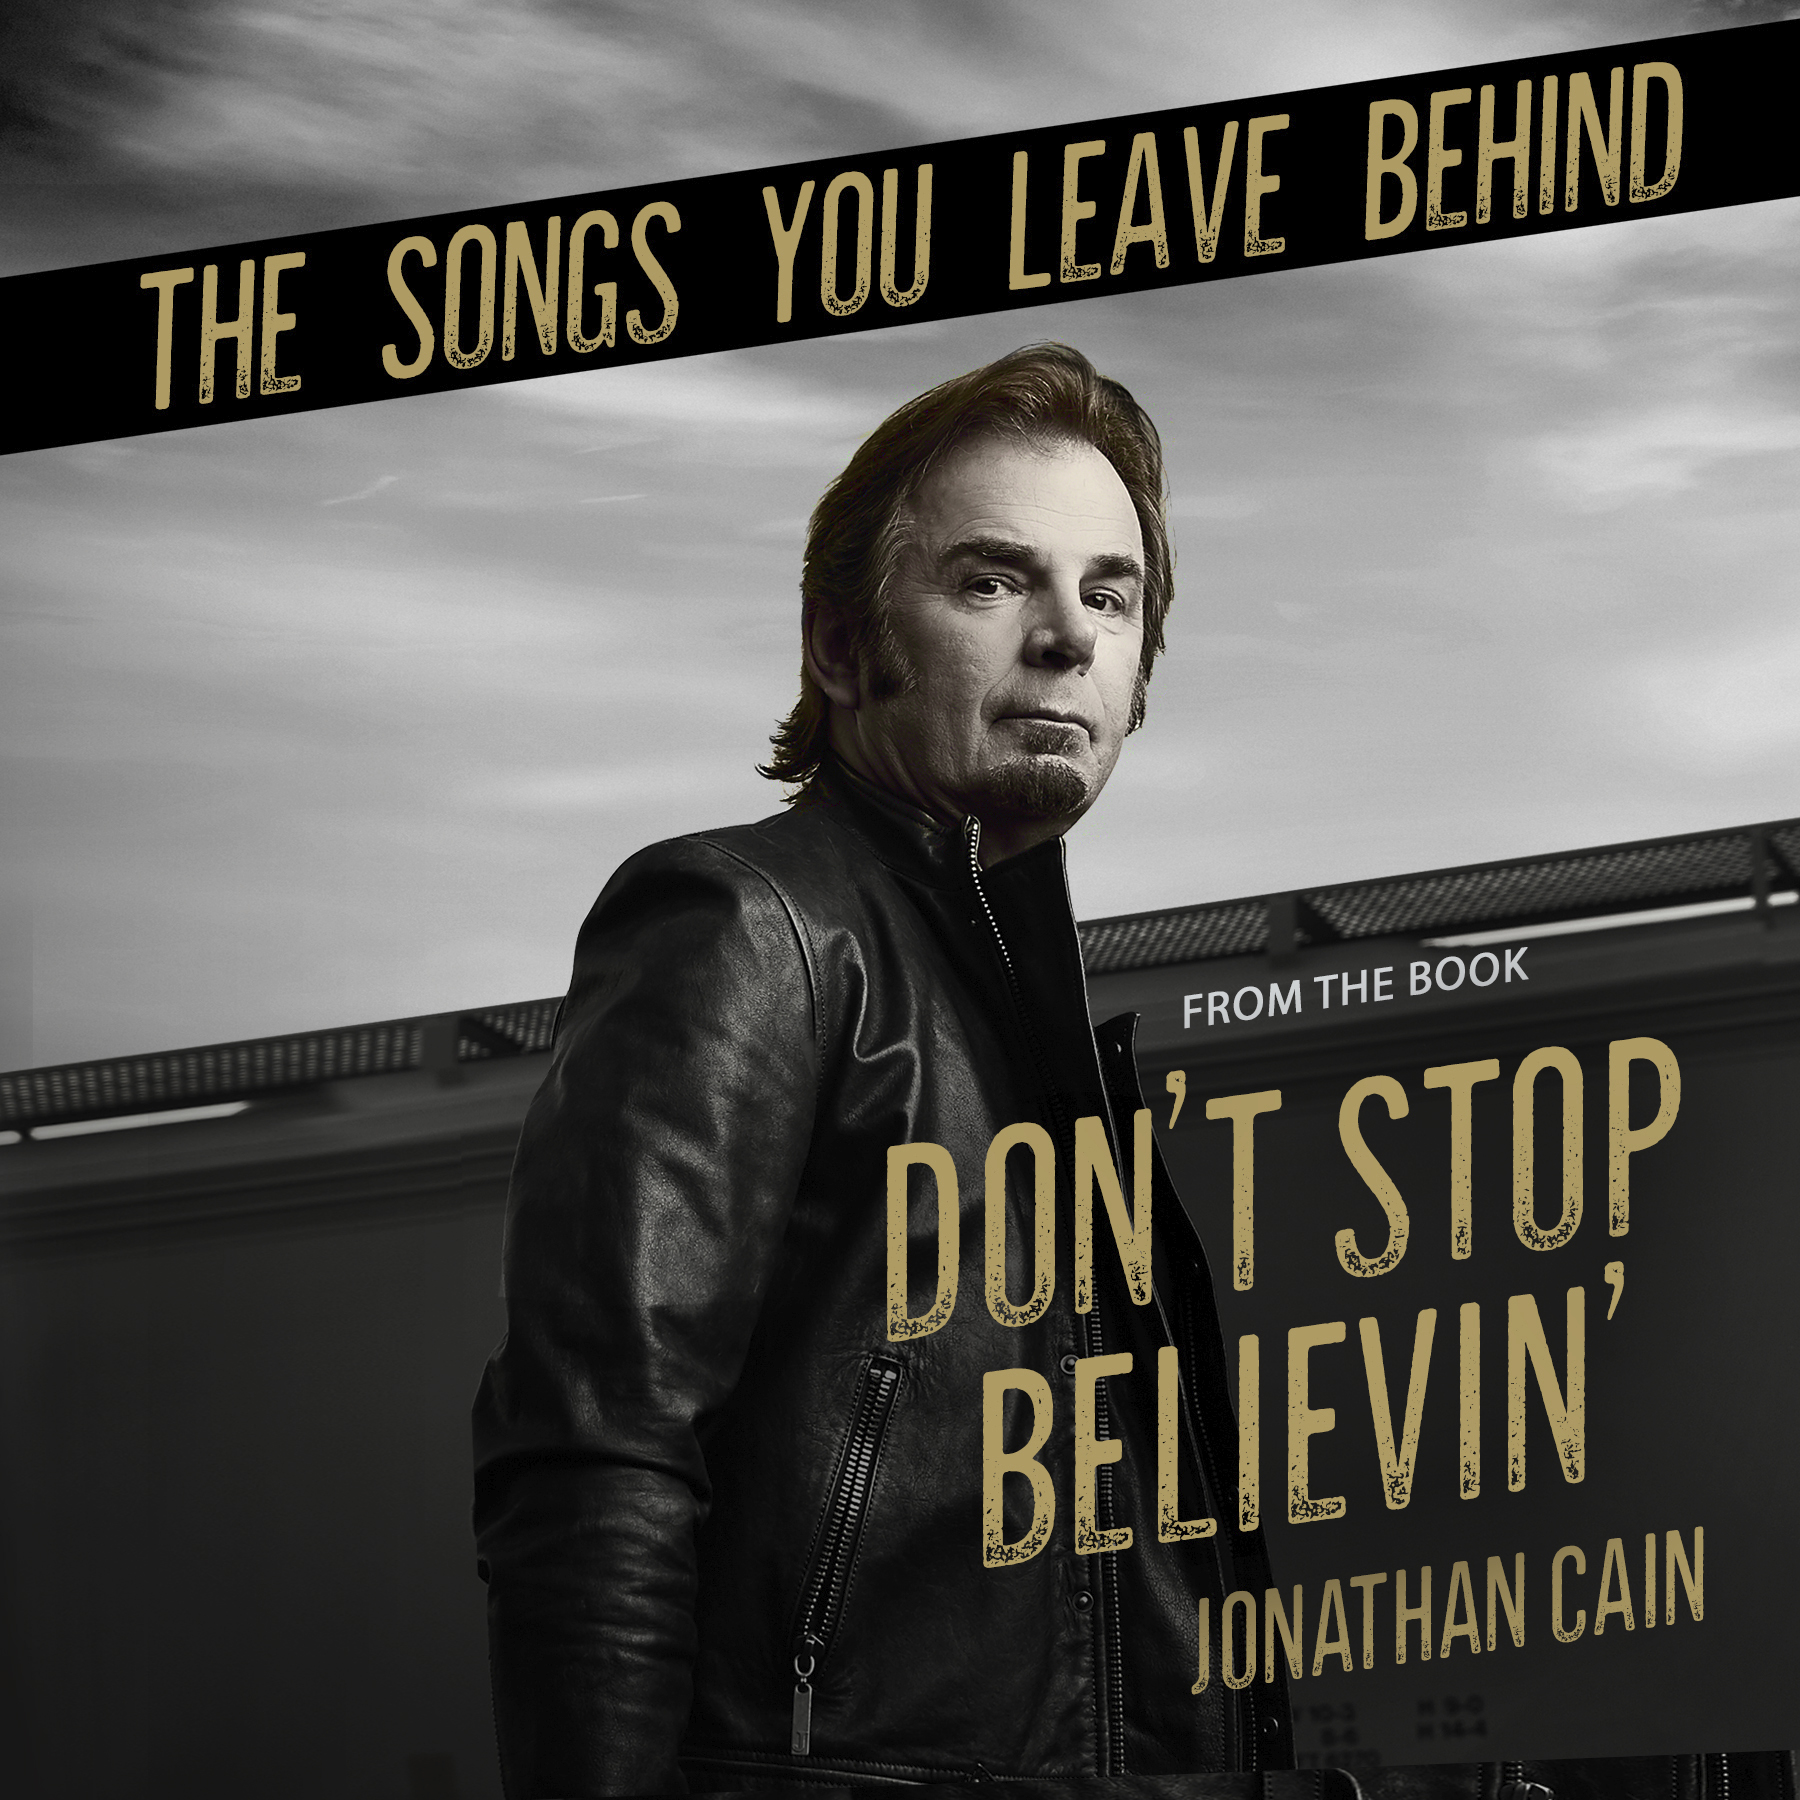 Jonathan Cain - The Songs You Leave Behind